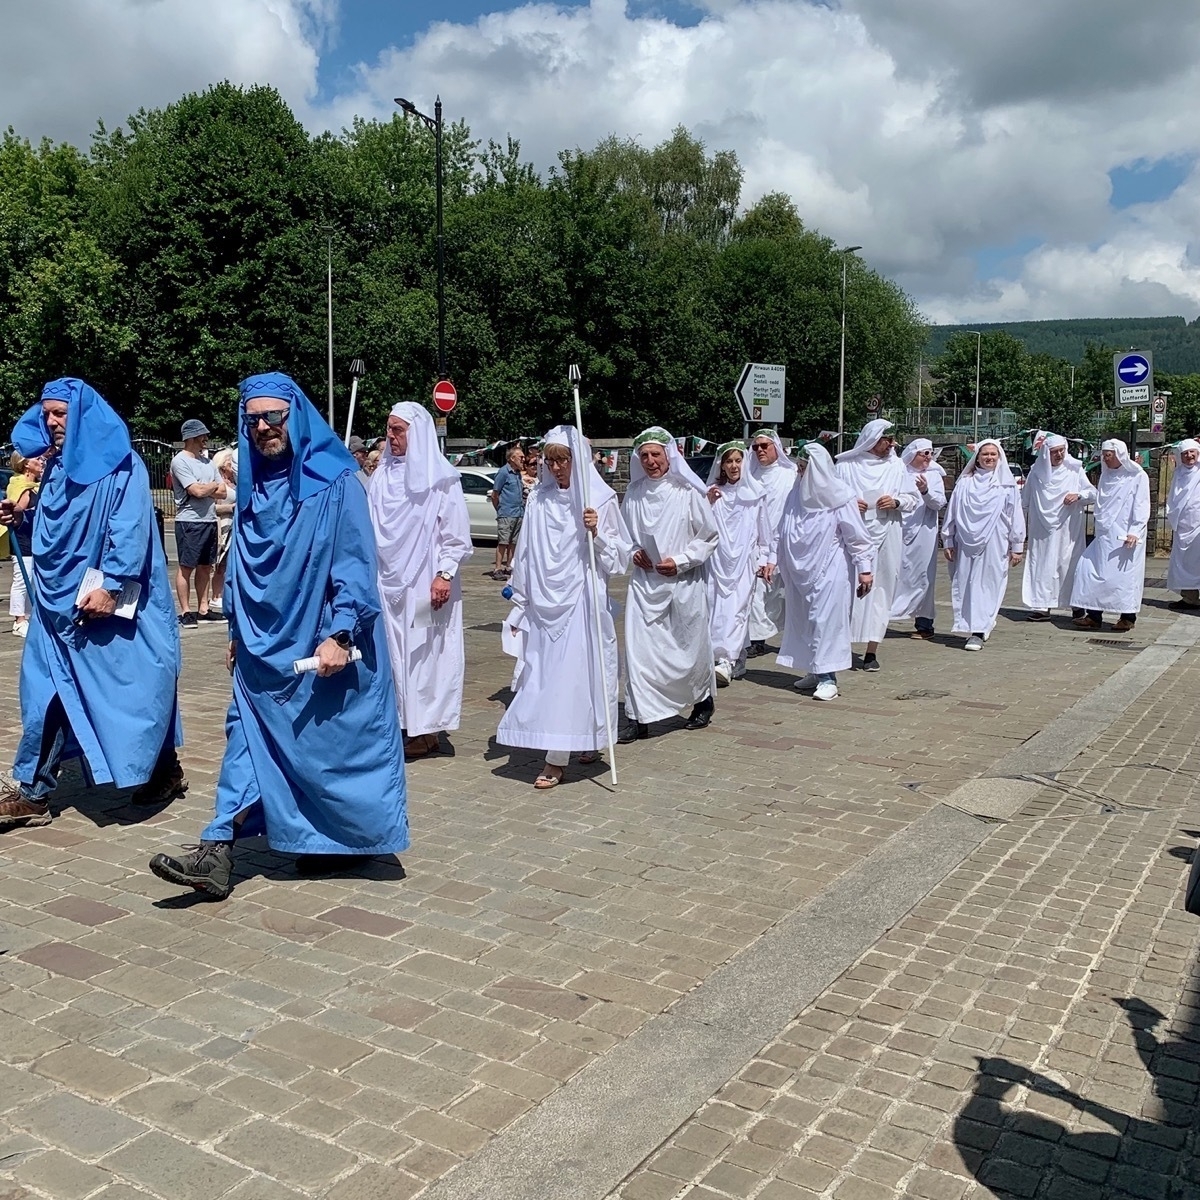 Procession of people in Druidic robes through a town centre